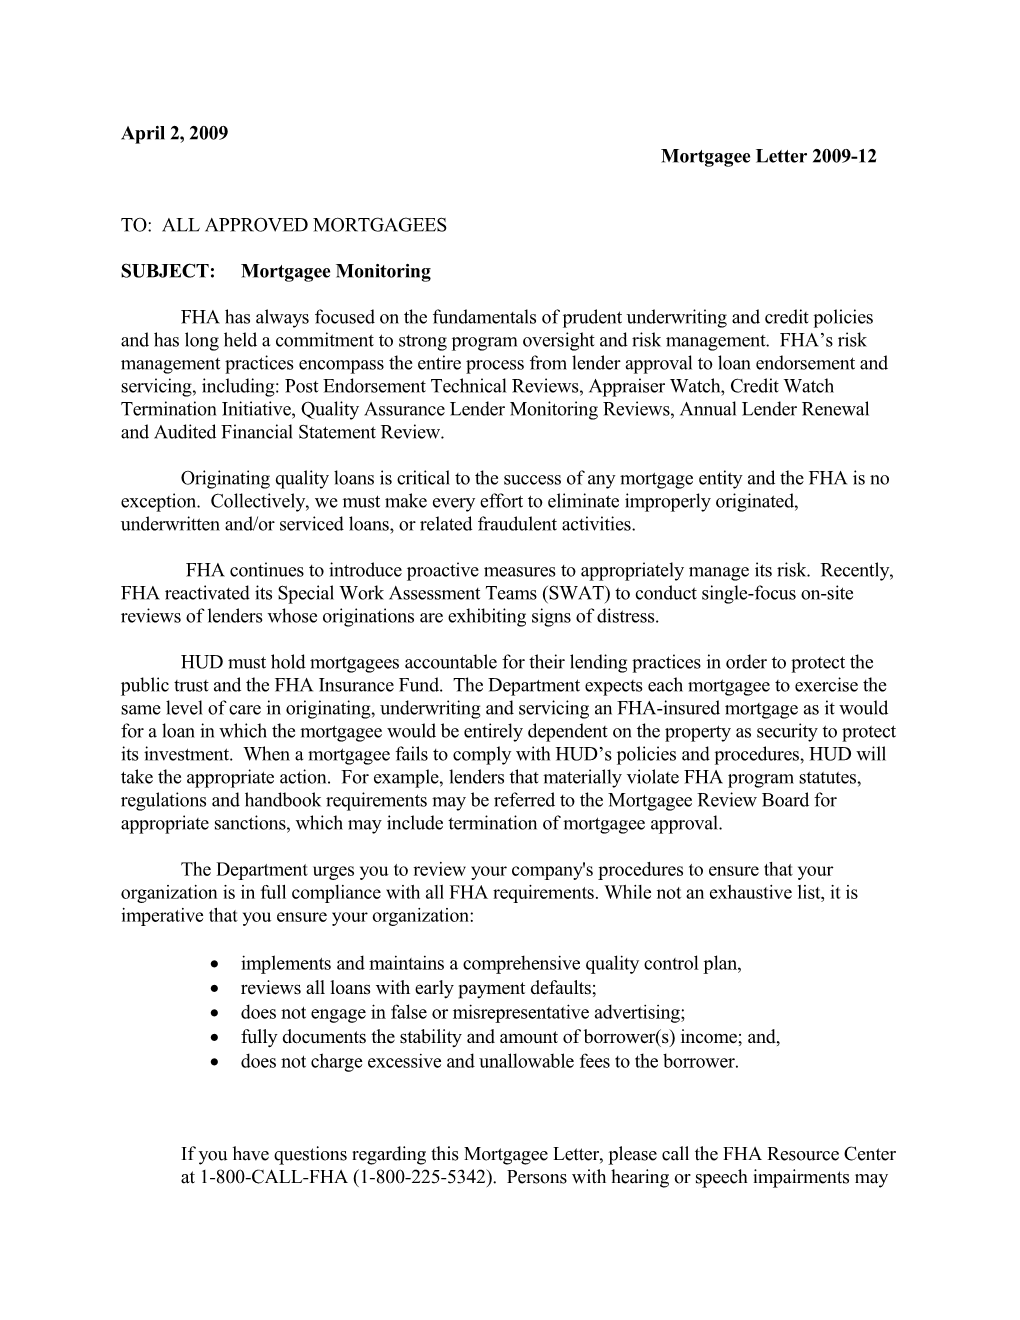 Mortgagee Letter 2009-12